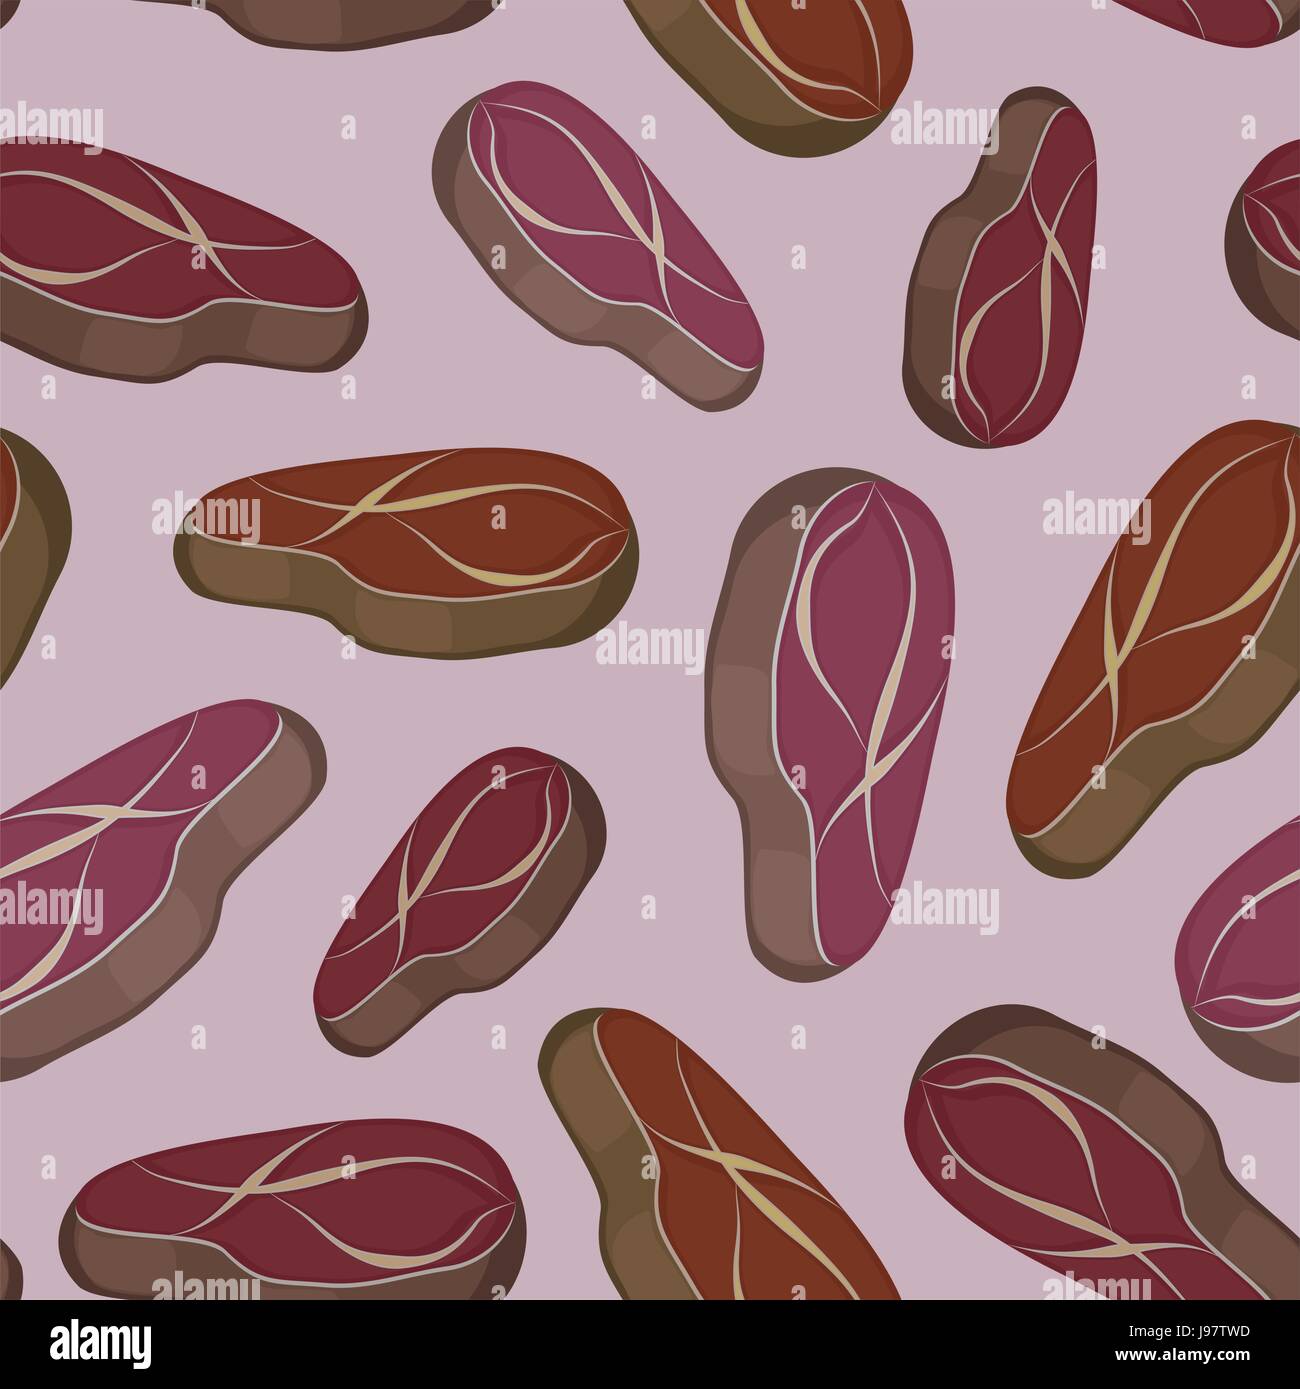 Sliced Beef Meat Seamless Pattern Graphic by Dre Studico · Creative Fabrica